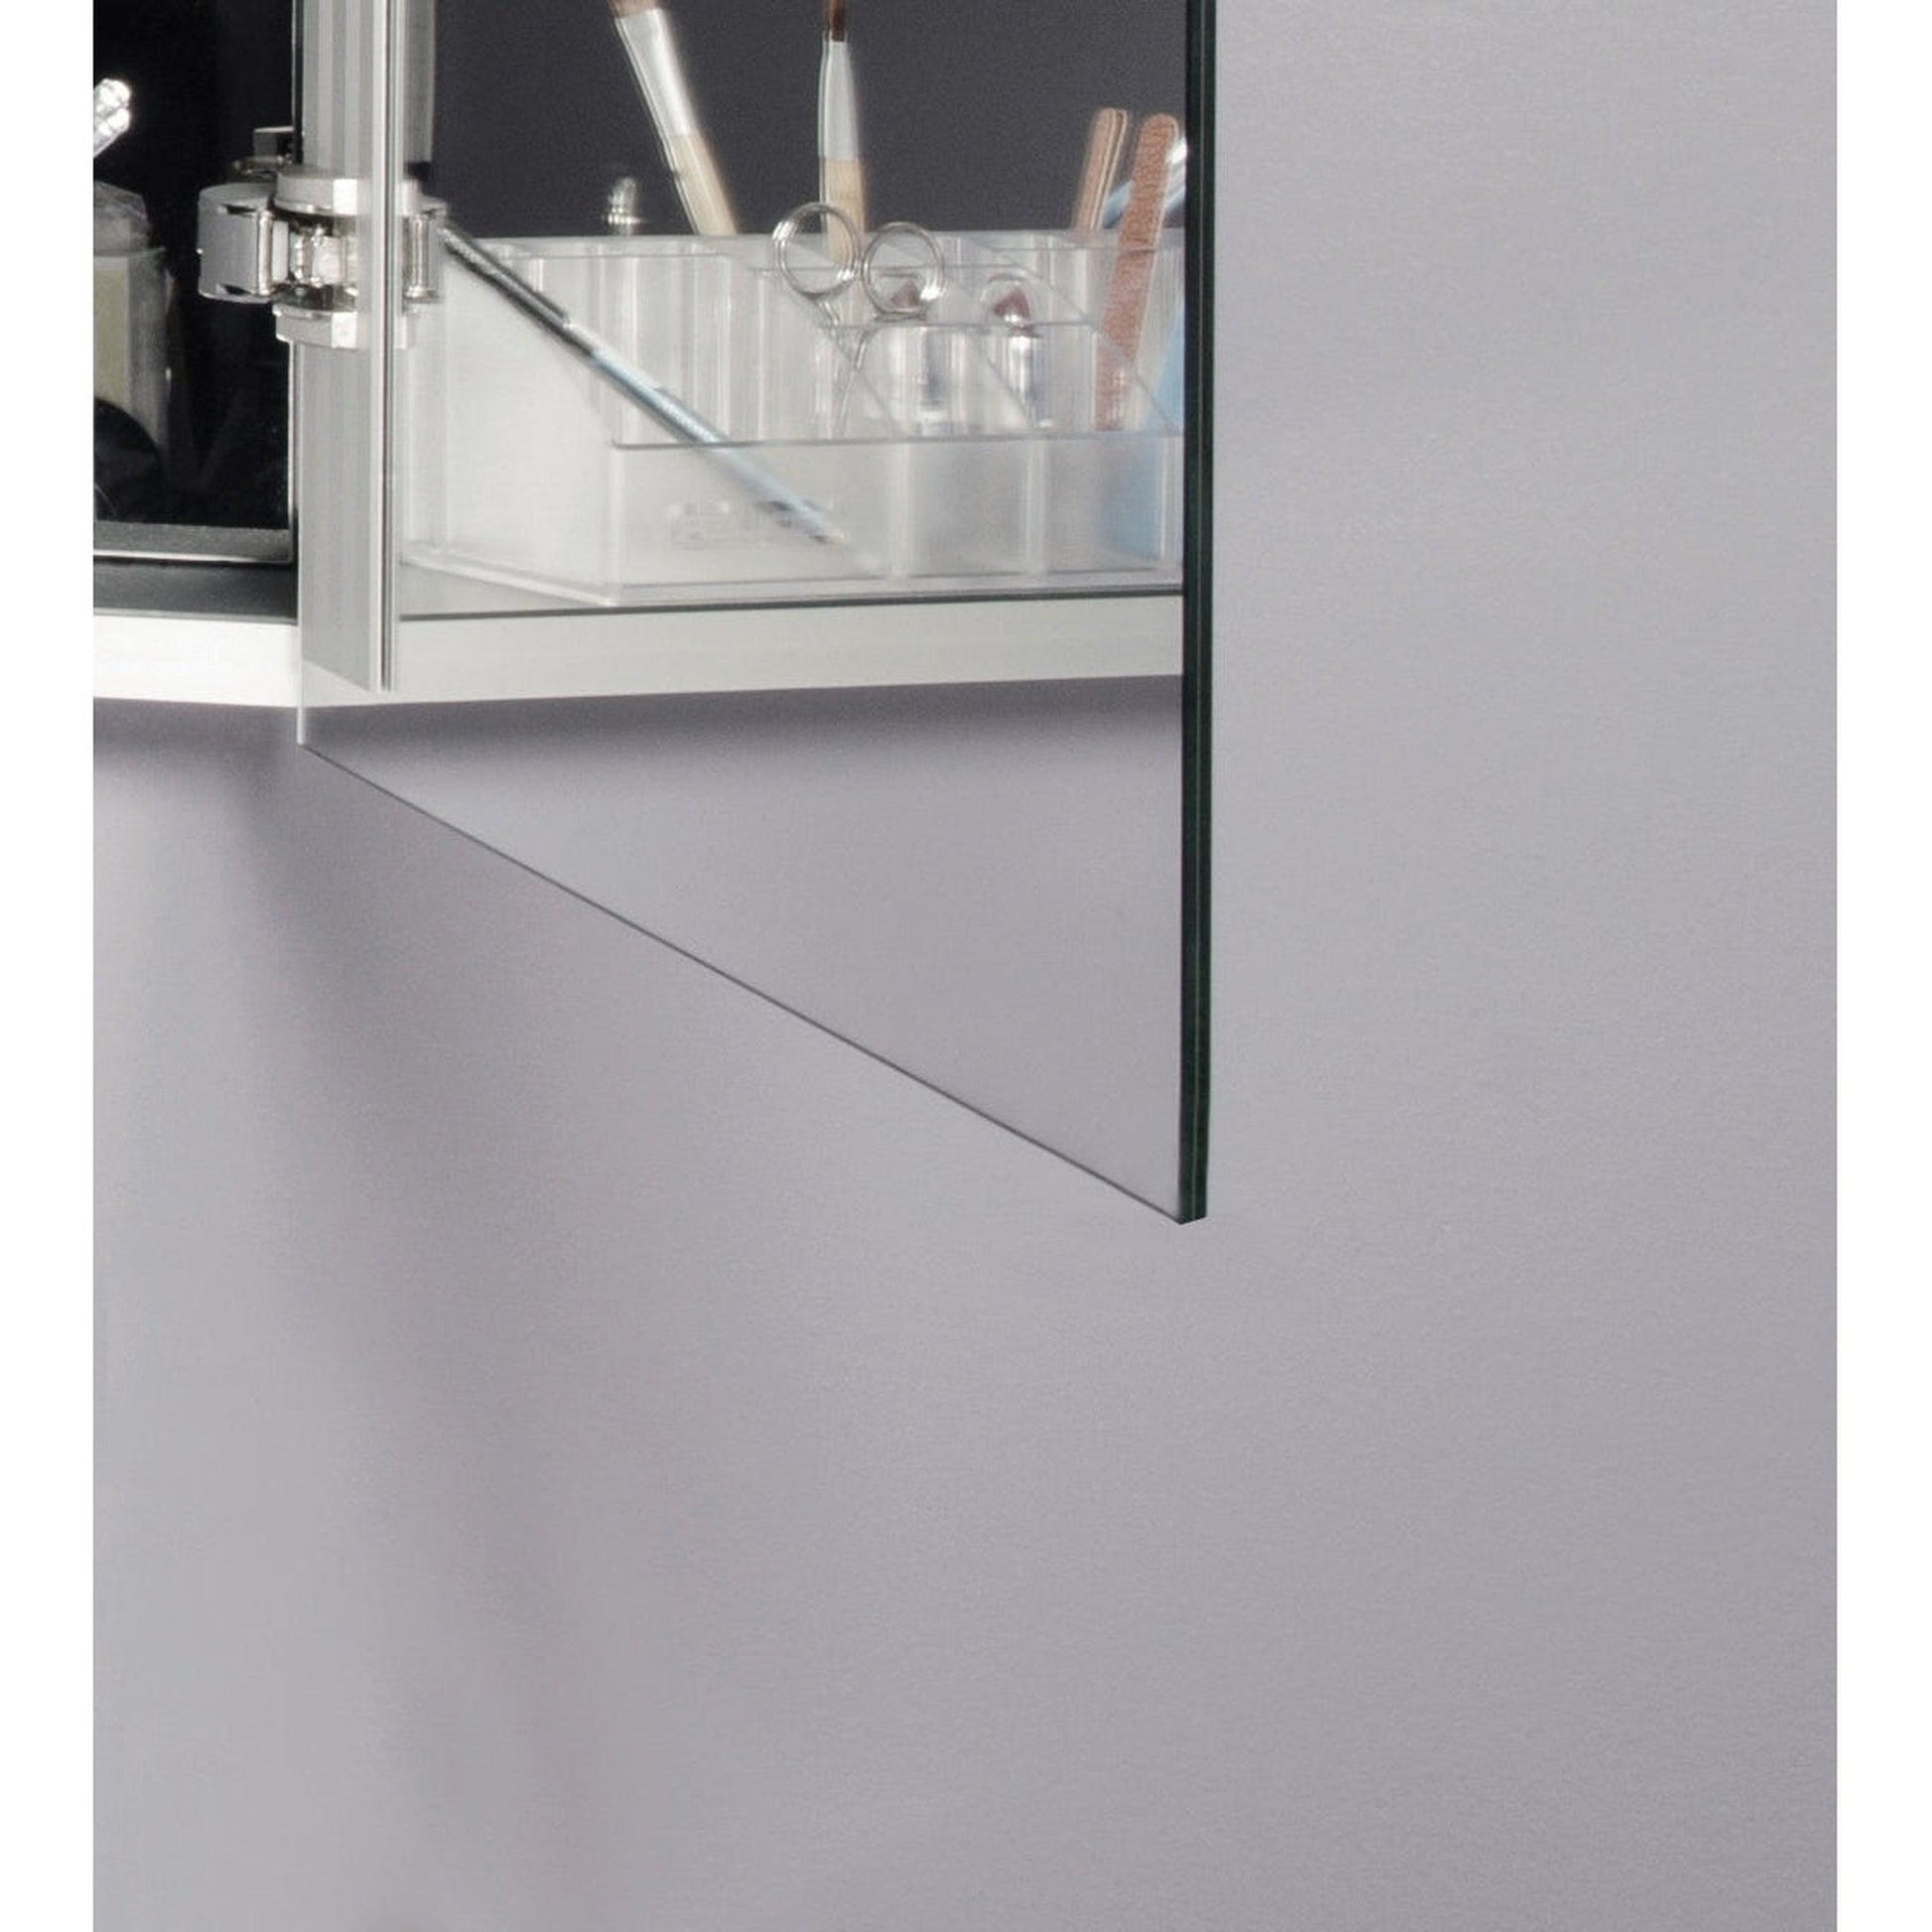 Sidler Xamo 32" x 30" 3000K Double Mirror Door Medicine Cabinet With Built-in GFCI outlet and Night Light Function